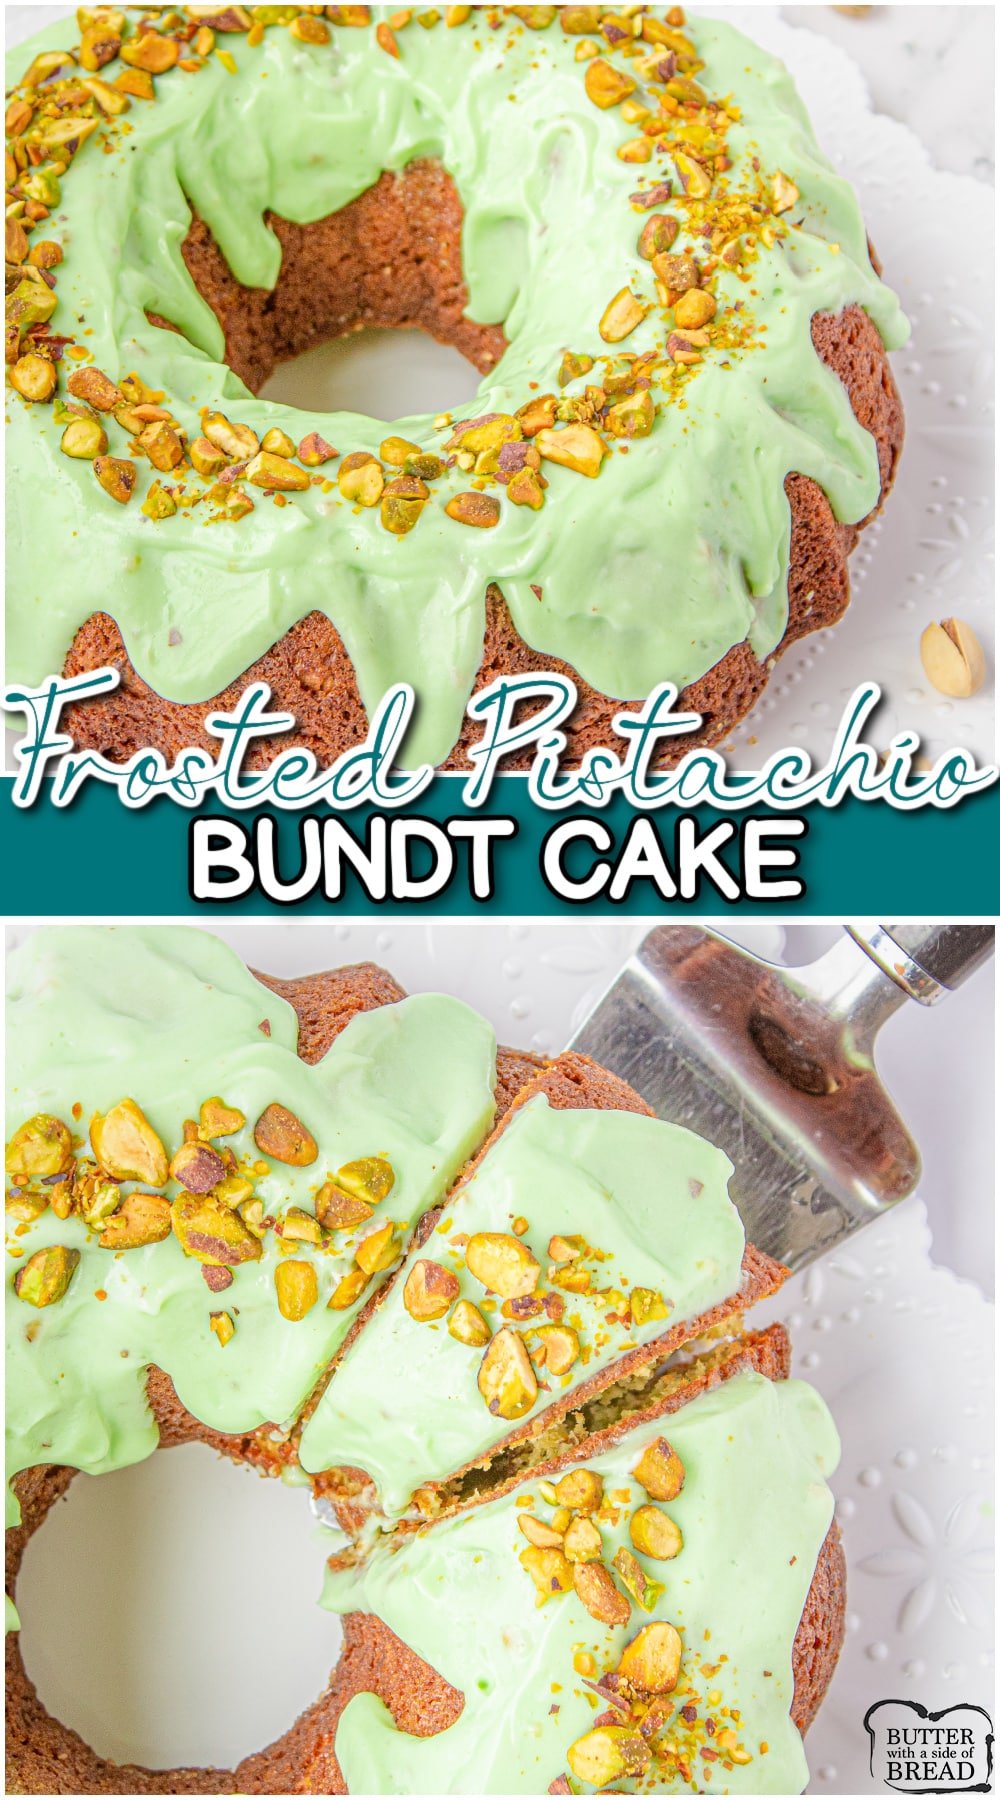 Pistachio Bundt Cake made with a cake mix, pudding mix, lemon lime soda & pistachios! This pistachio cake with frosting has a green tint & is especially festive around St. Patrick's Day!